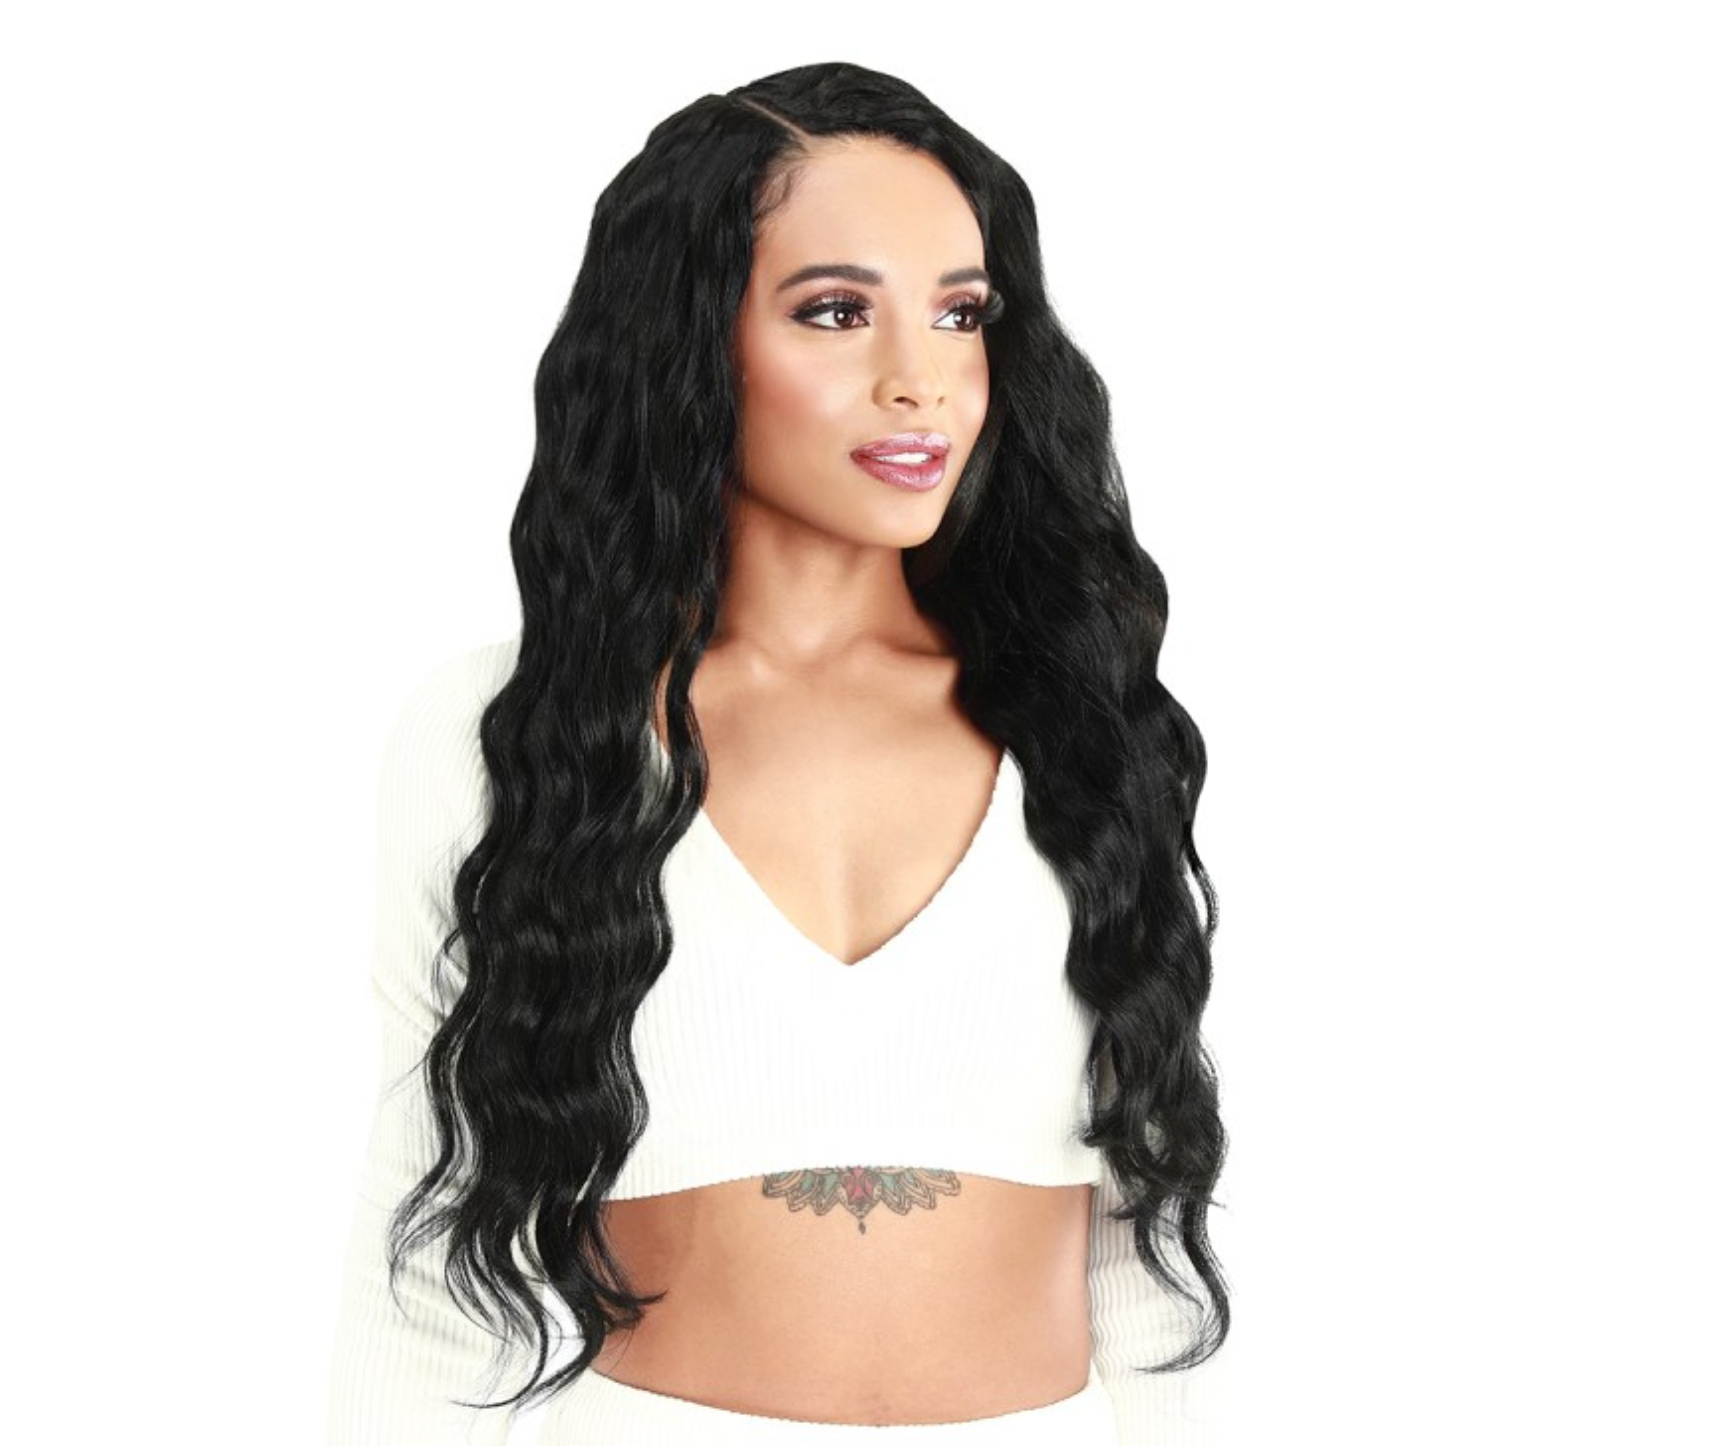 Zury Natural Dream Clip In Hair Extensions Ocean Wave 24”